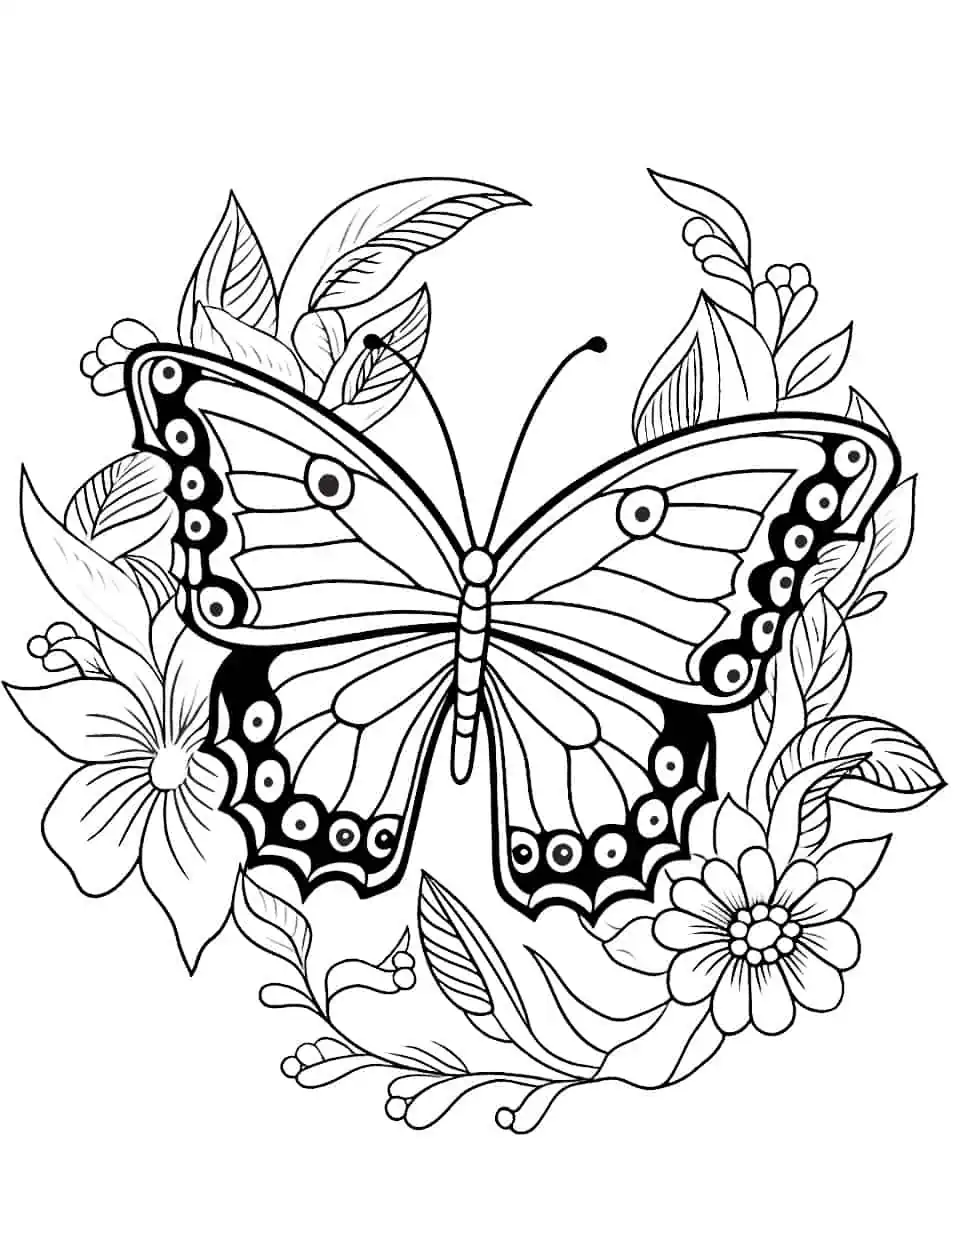 Tropical Splendor Butterfly Coloring Page - A coloring page featuring tropical butterflies surrounded by exotic flowers and foliage.